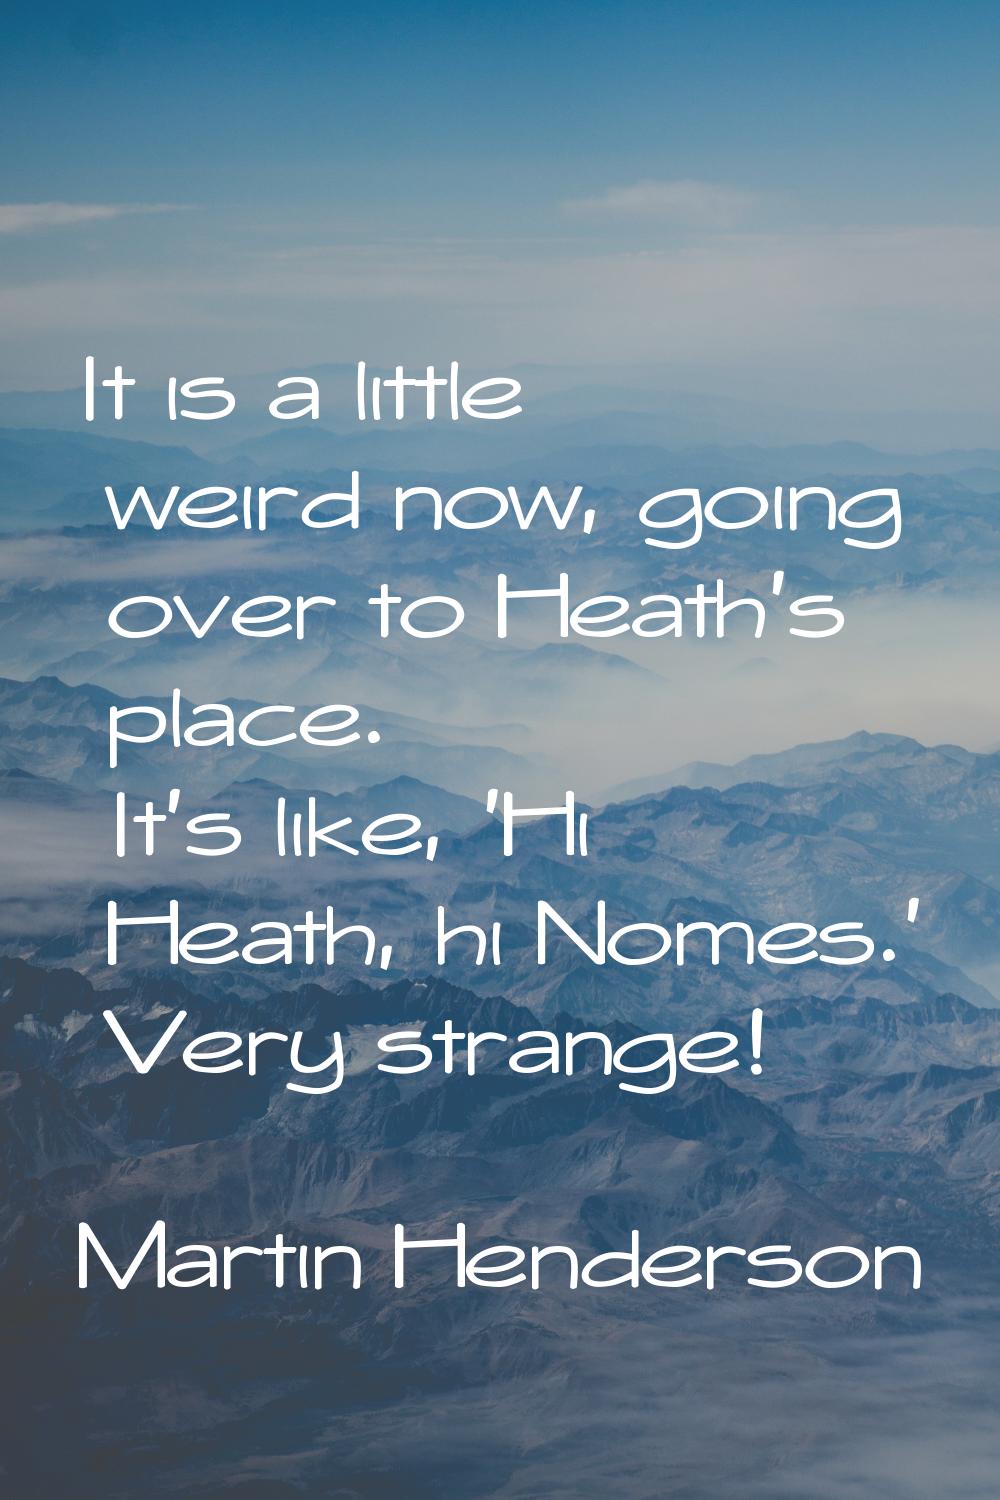 It is a little weird now, going over to Heath's place. It's like, 'Hi Heath, hi Nomes.' Very strang